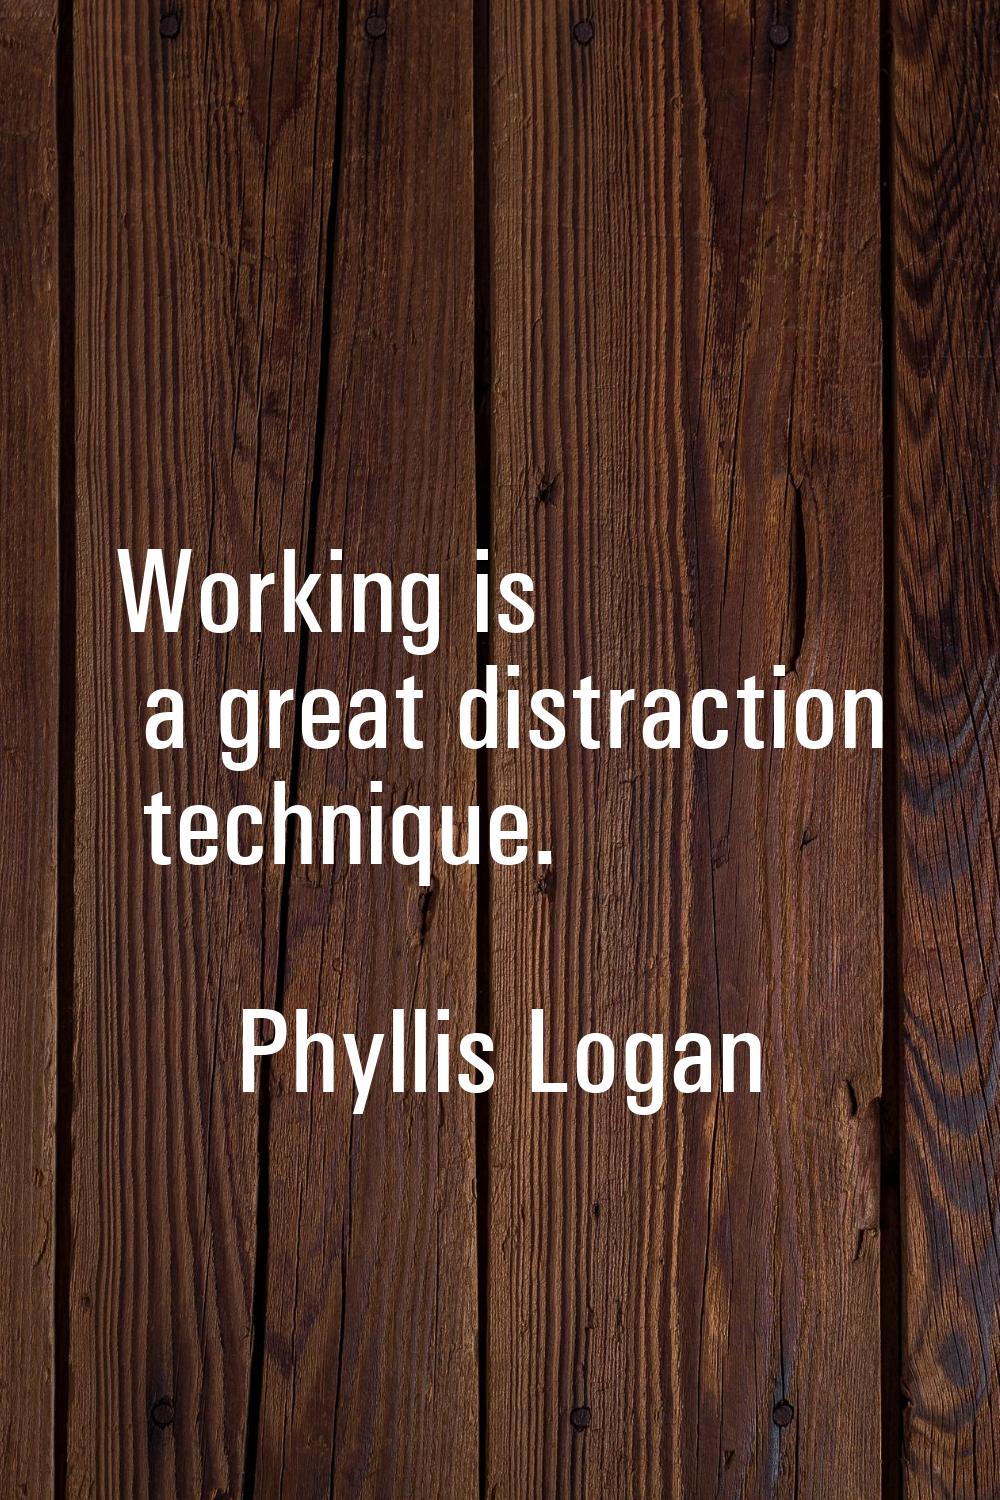 Working is a great distraction technique.